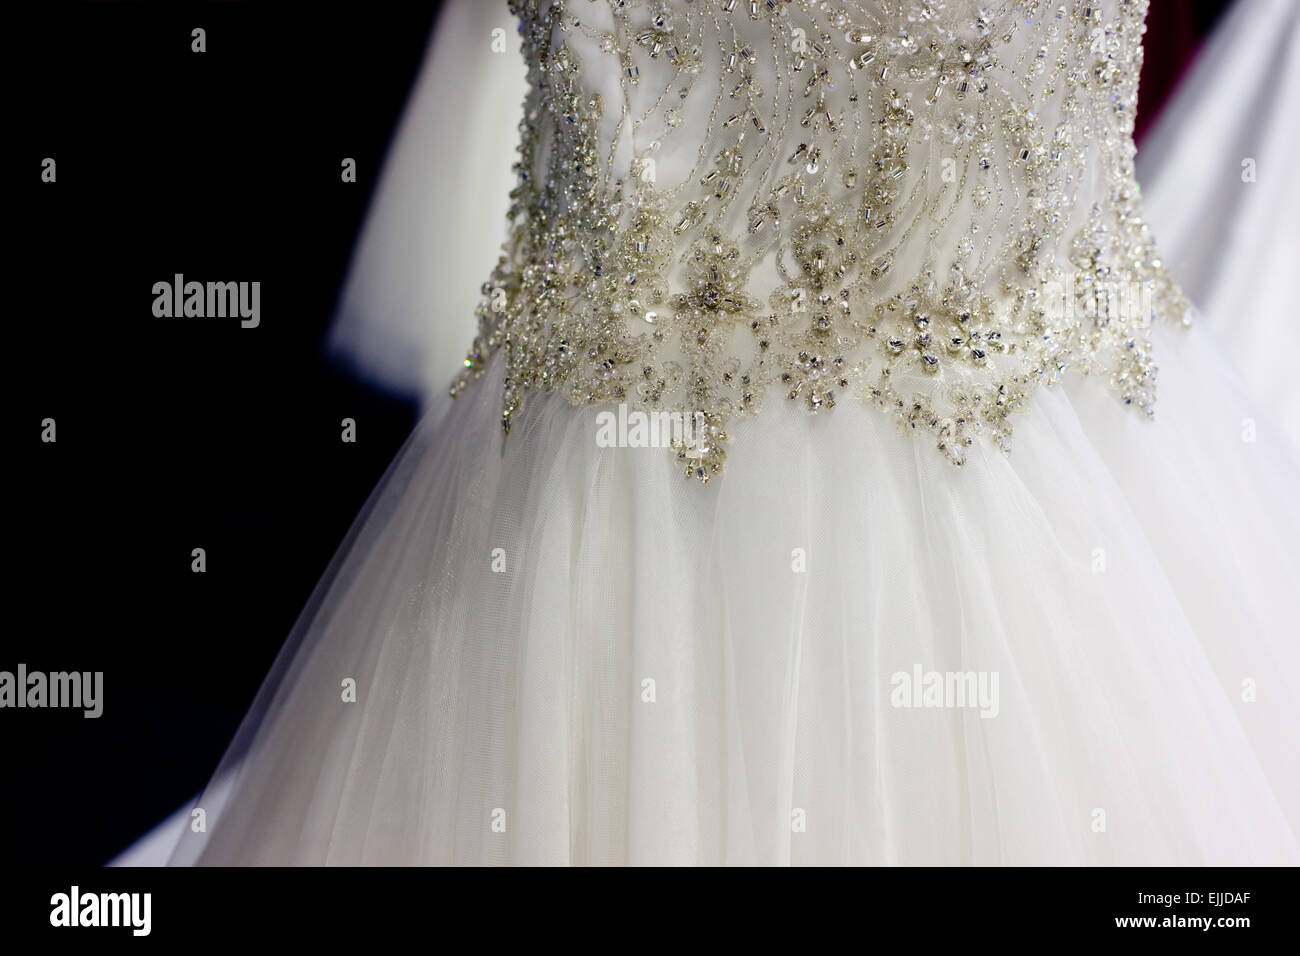 Detail of bridal gown with ornaments as pearls, silver and rhinestones Stock Photo